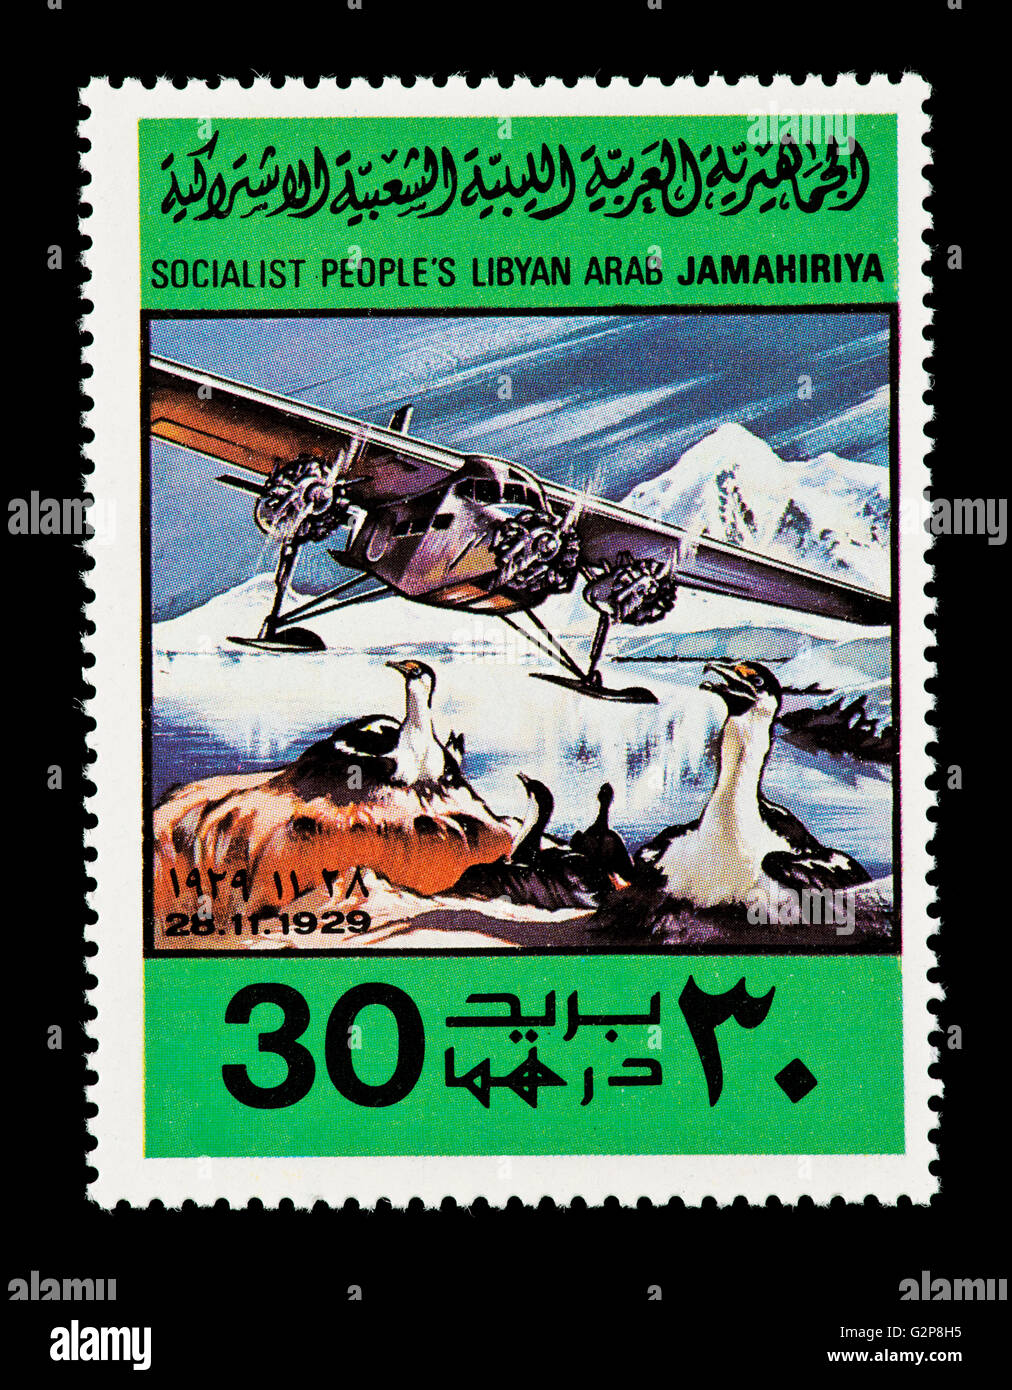 Postage stamp from Libya depicting Admiral Byrd's polar flight of 1929. Stock Photo